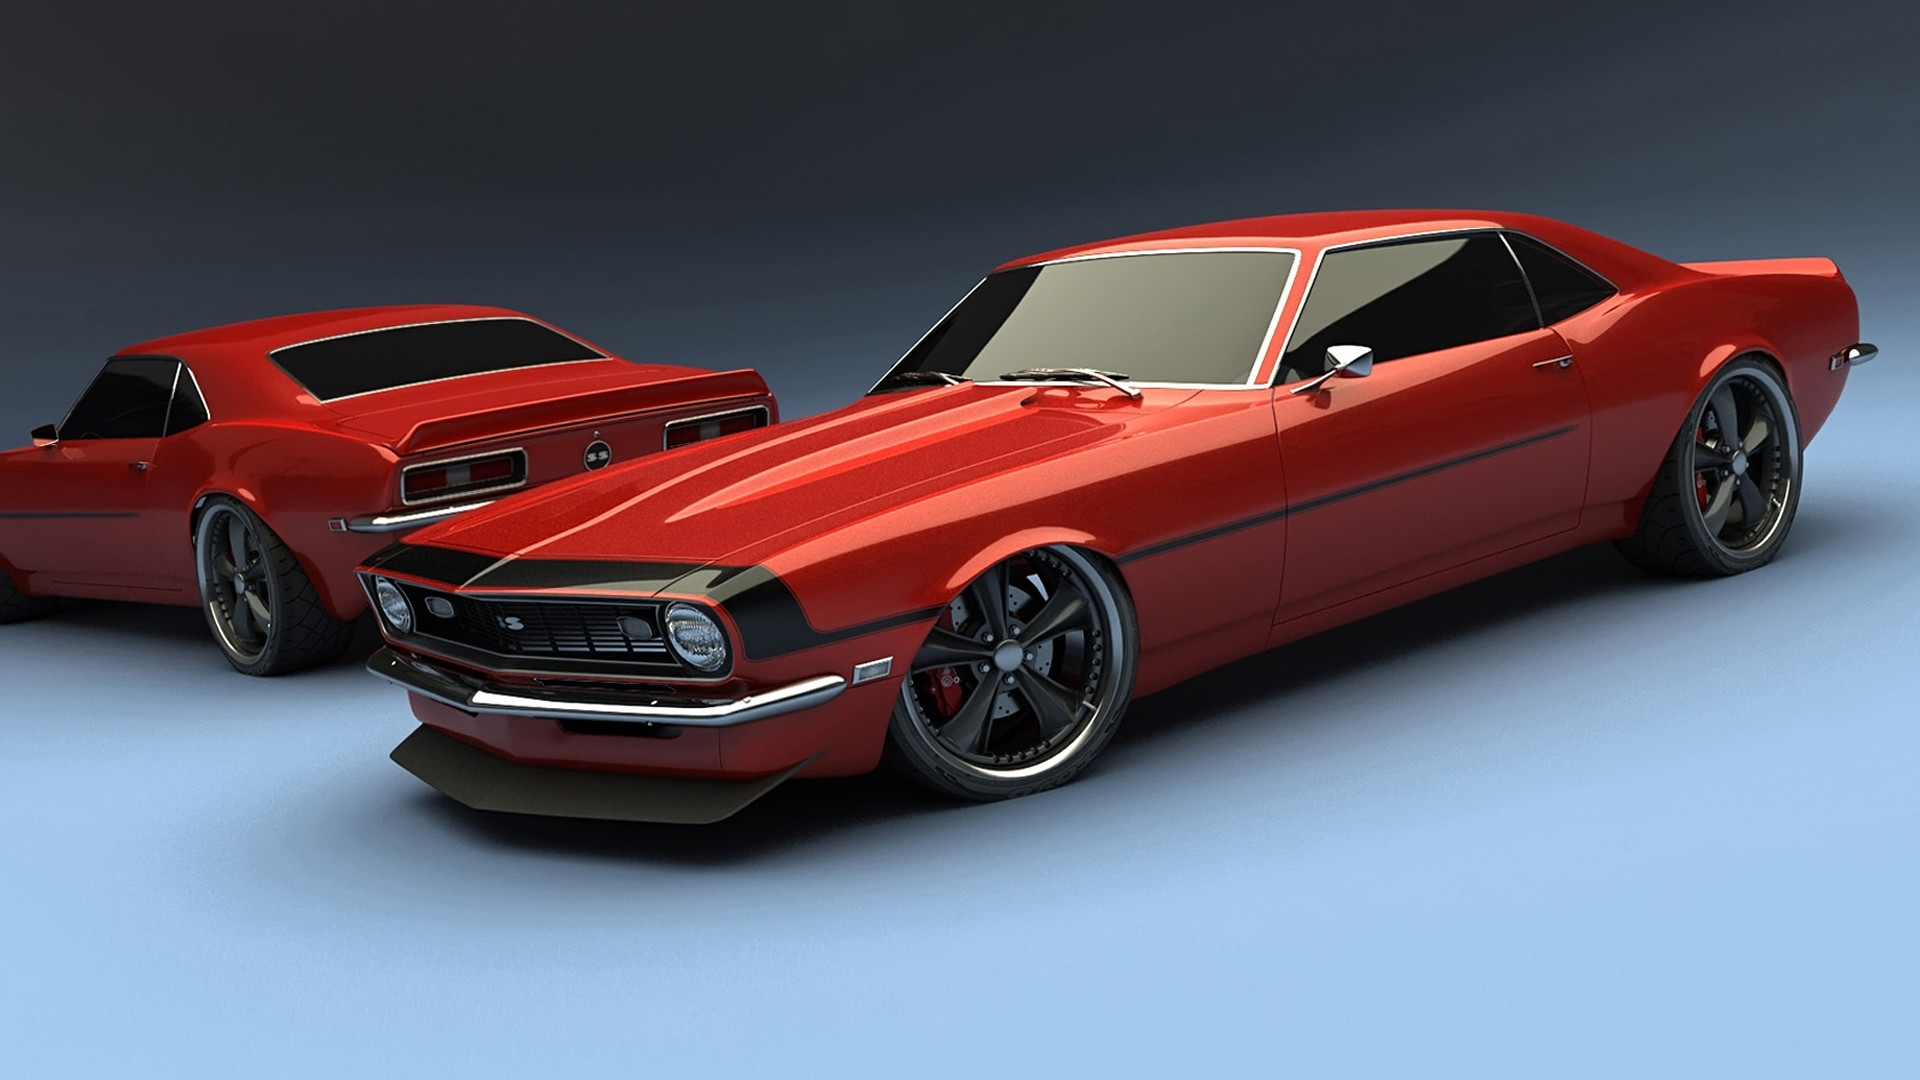 1920x1080 Muscle Car Chevelle Mobile Wallpaper